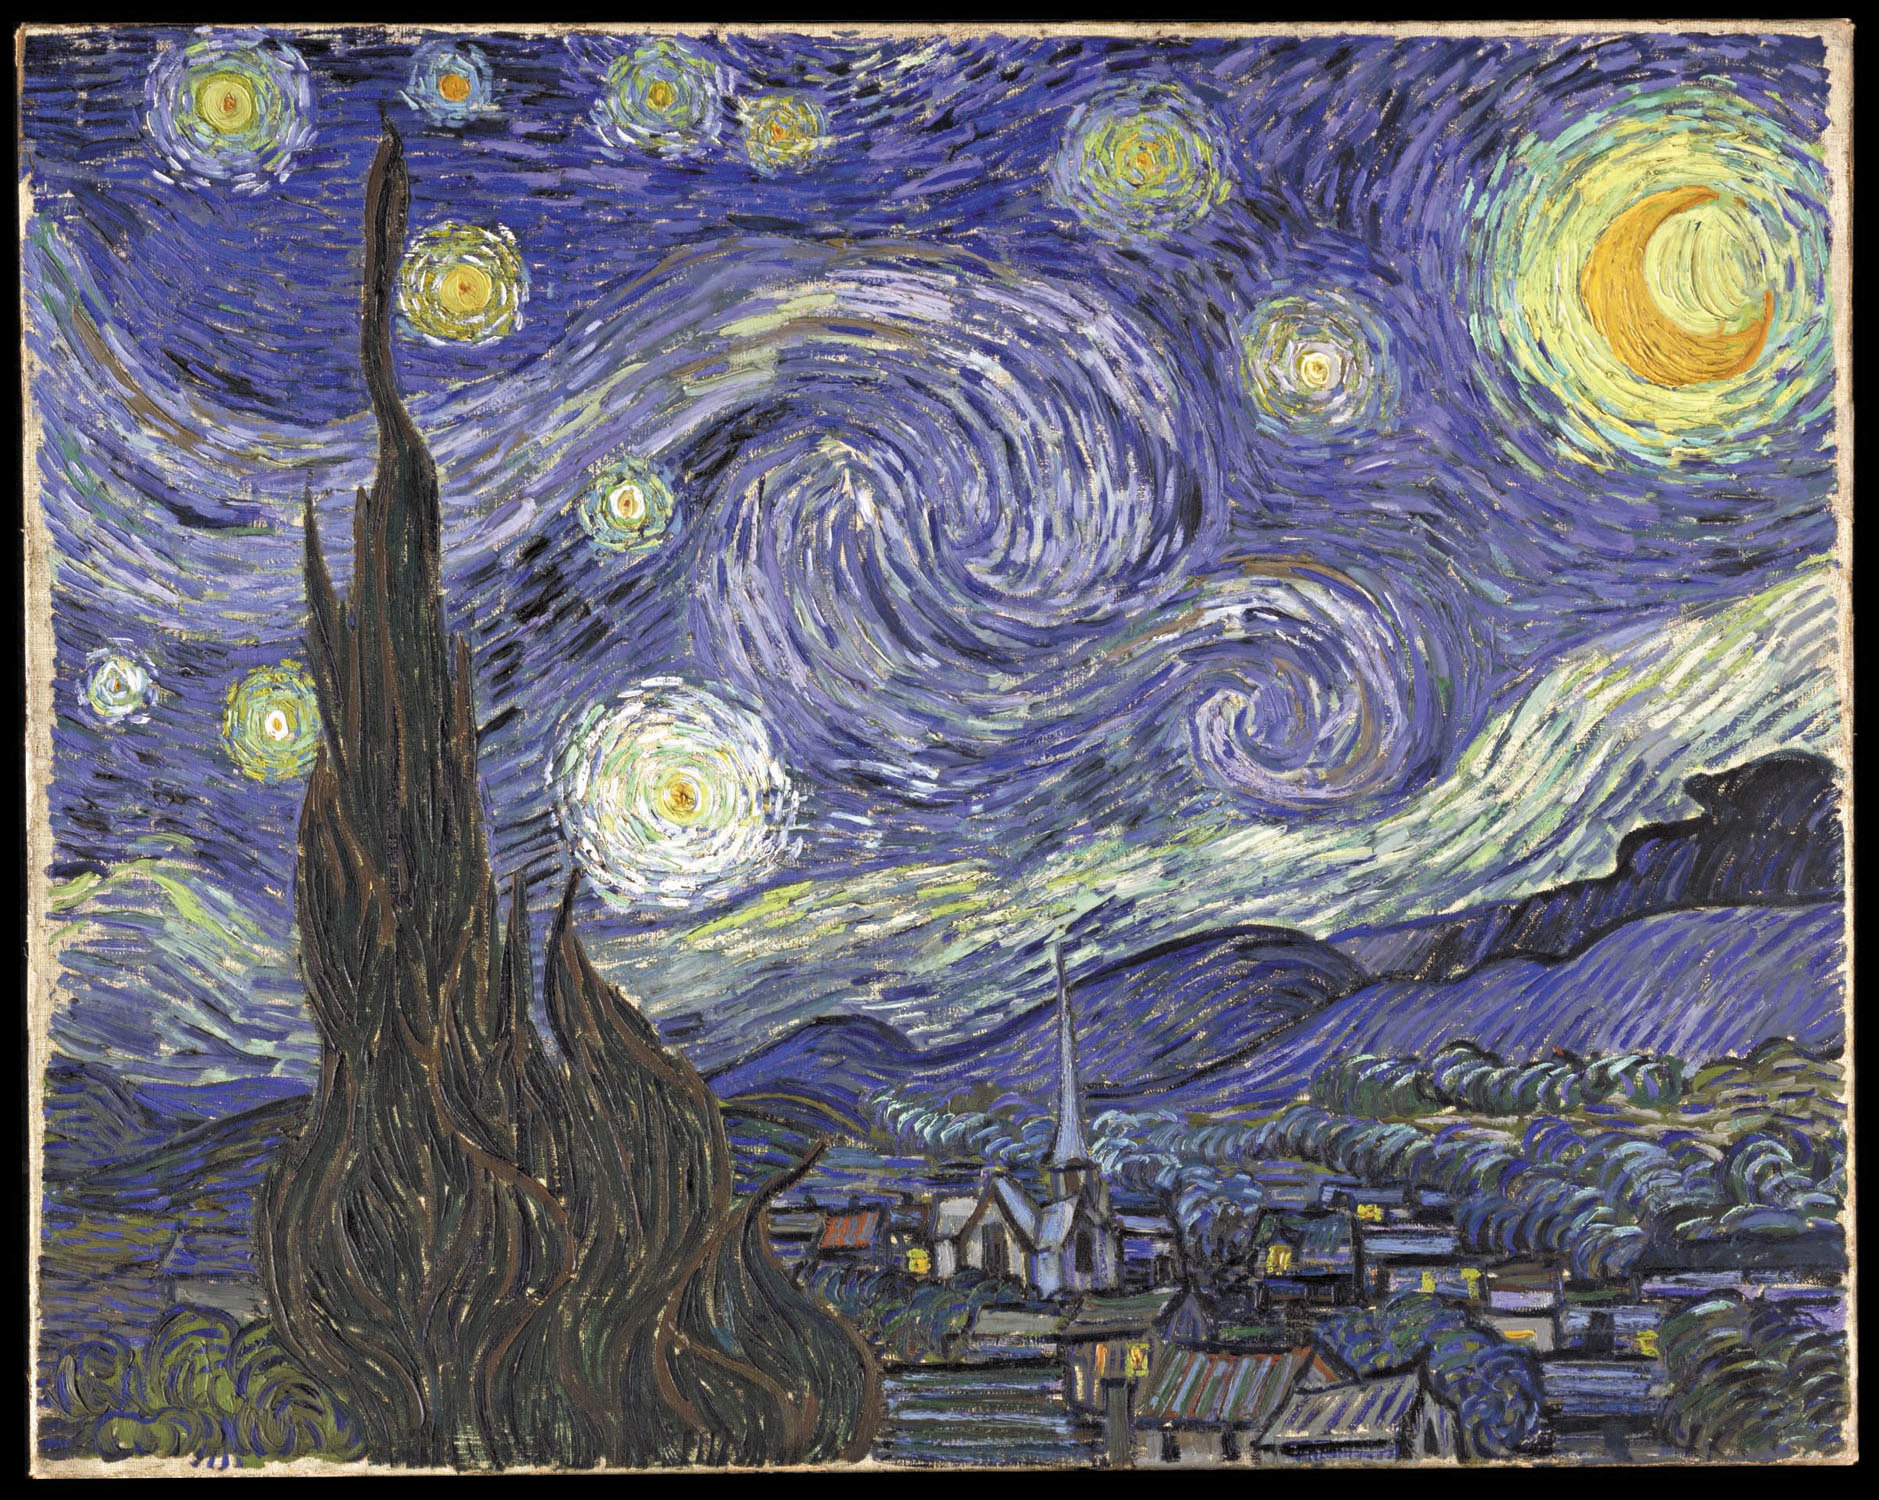 Musicians and Artists: Dutilleux and Van Gogh